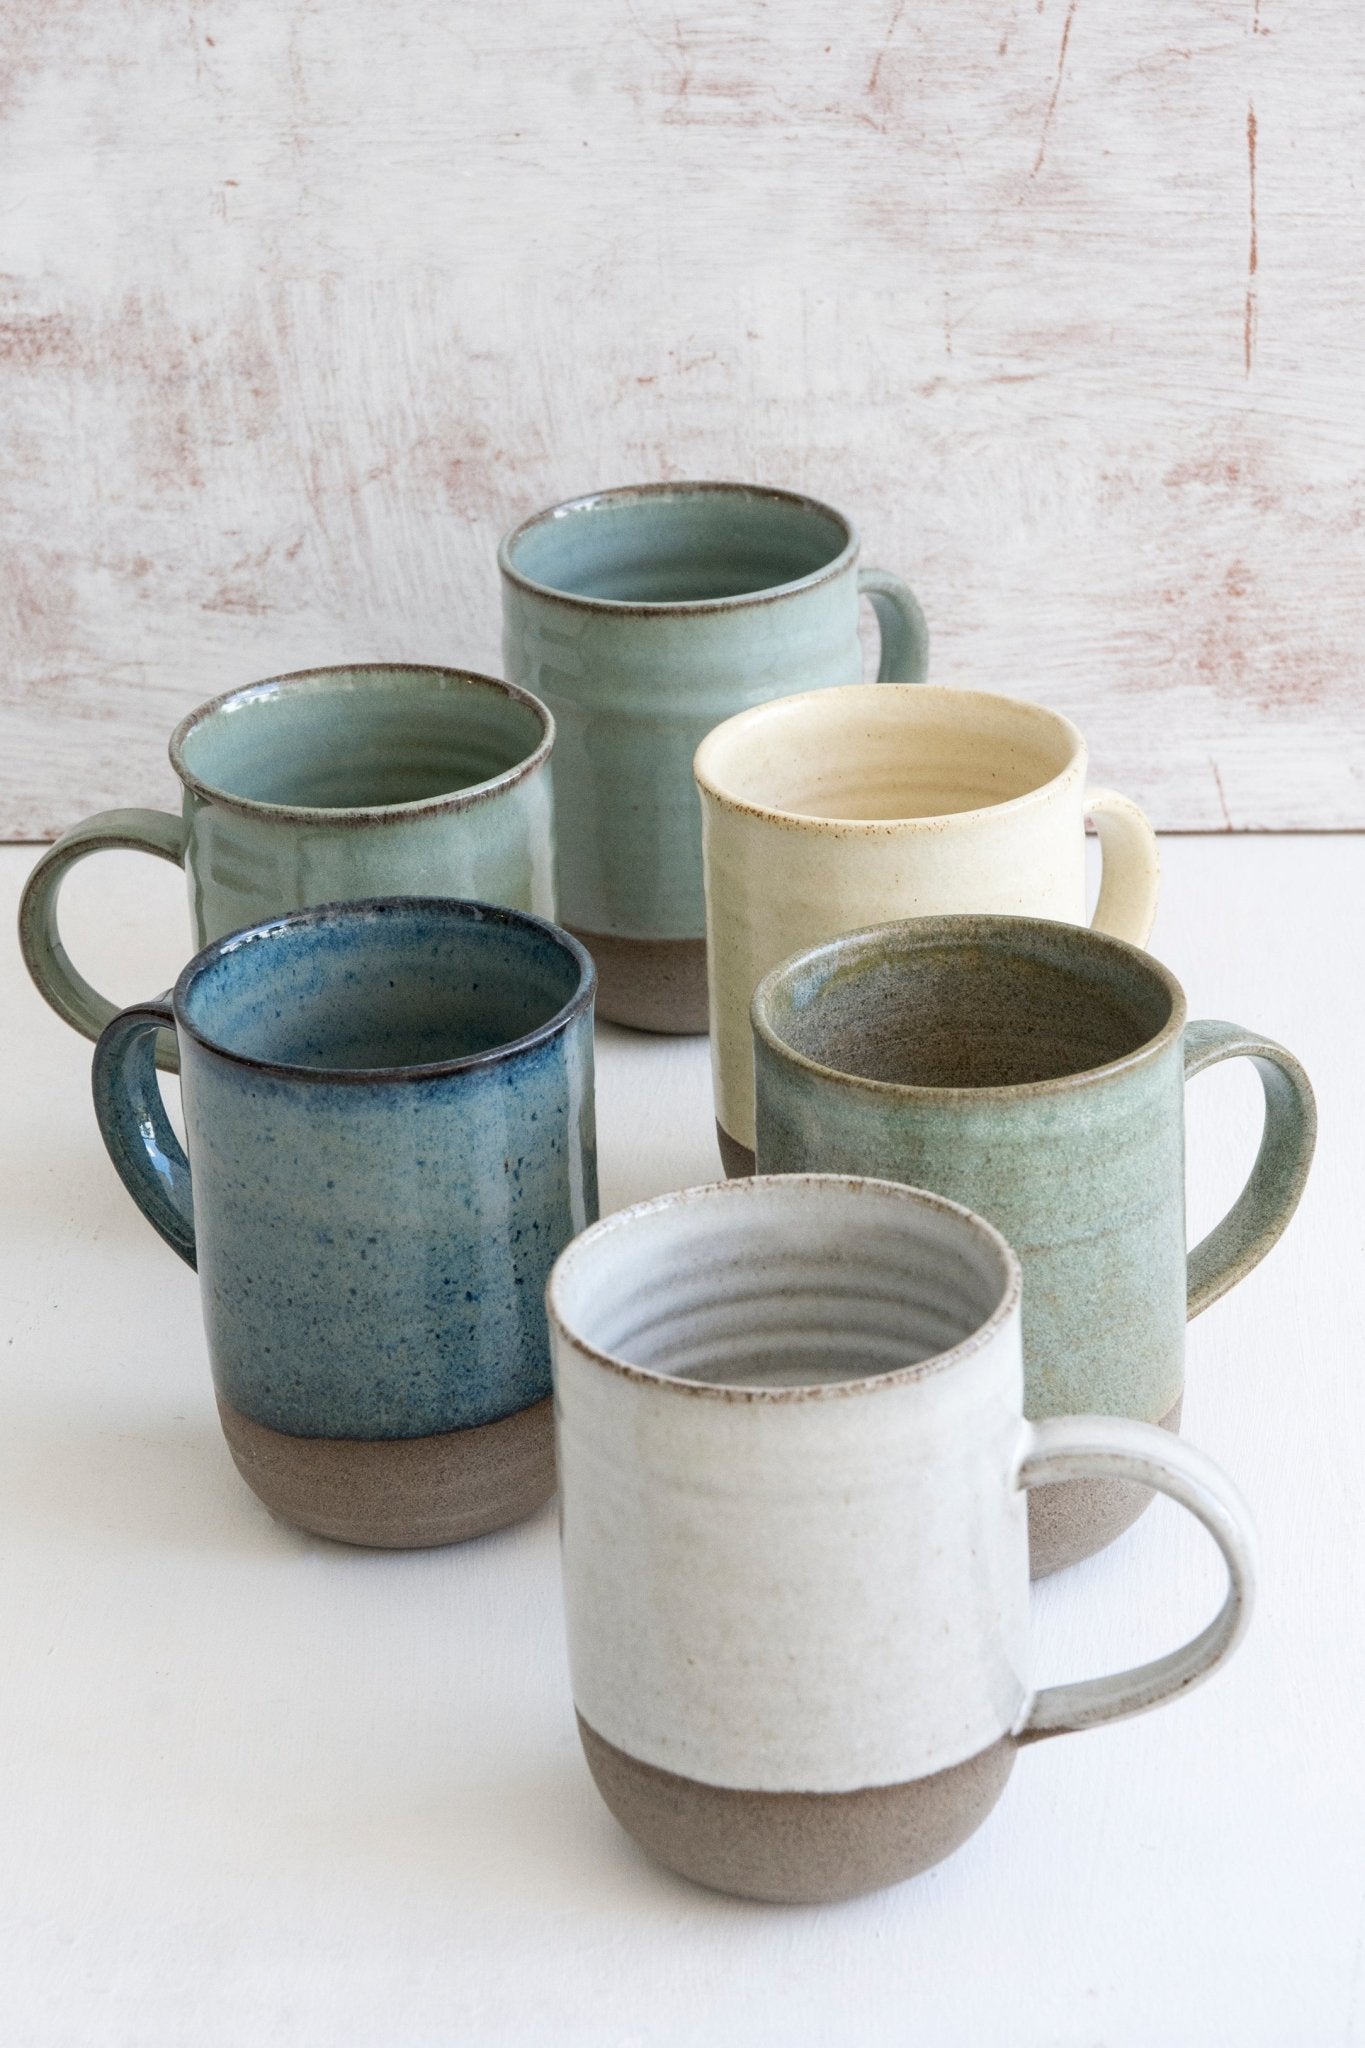 Porcelain or Ceramic? Know Your Coffee Mug Material for the Best